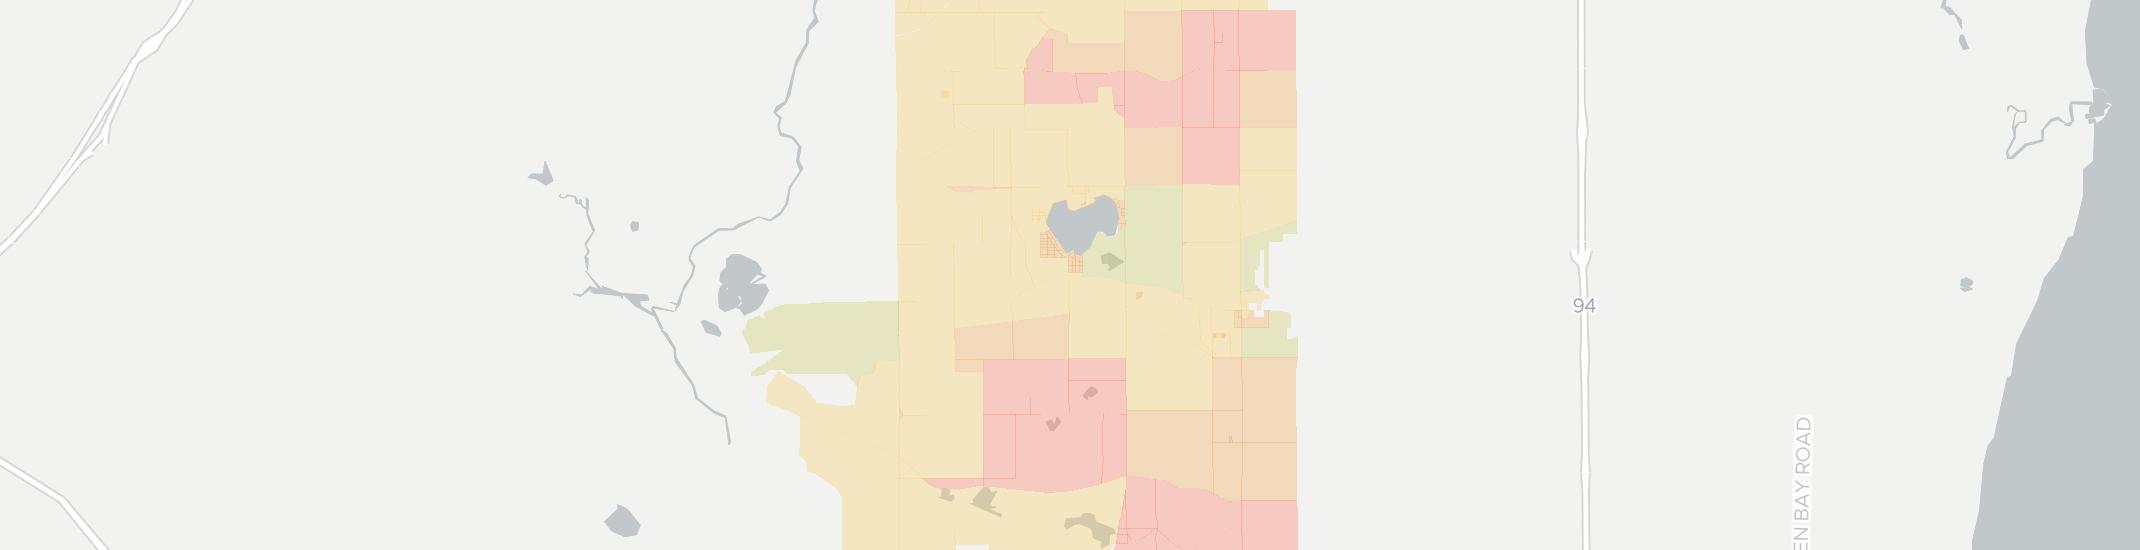 Kansasville Internet Competition Map. Click for interactive map.